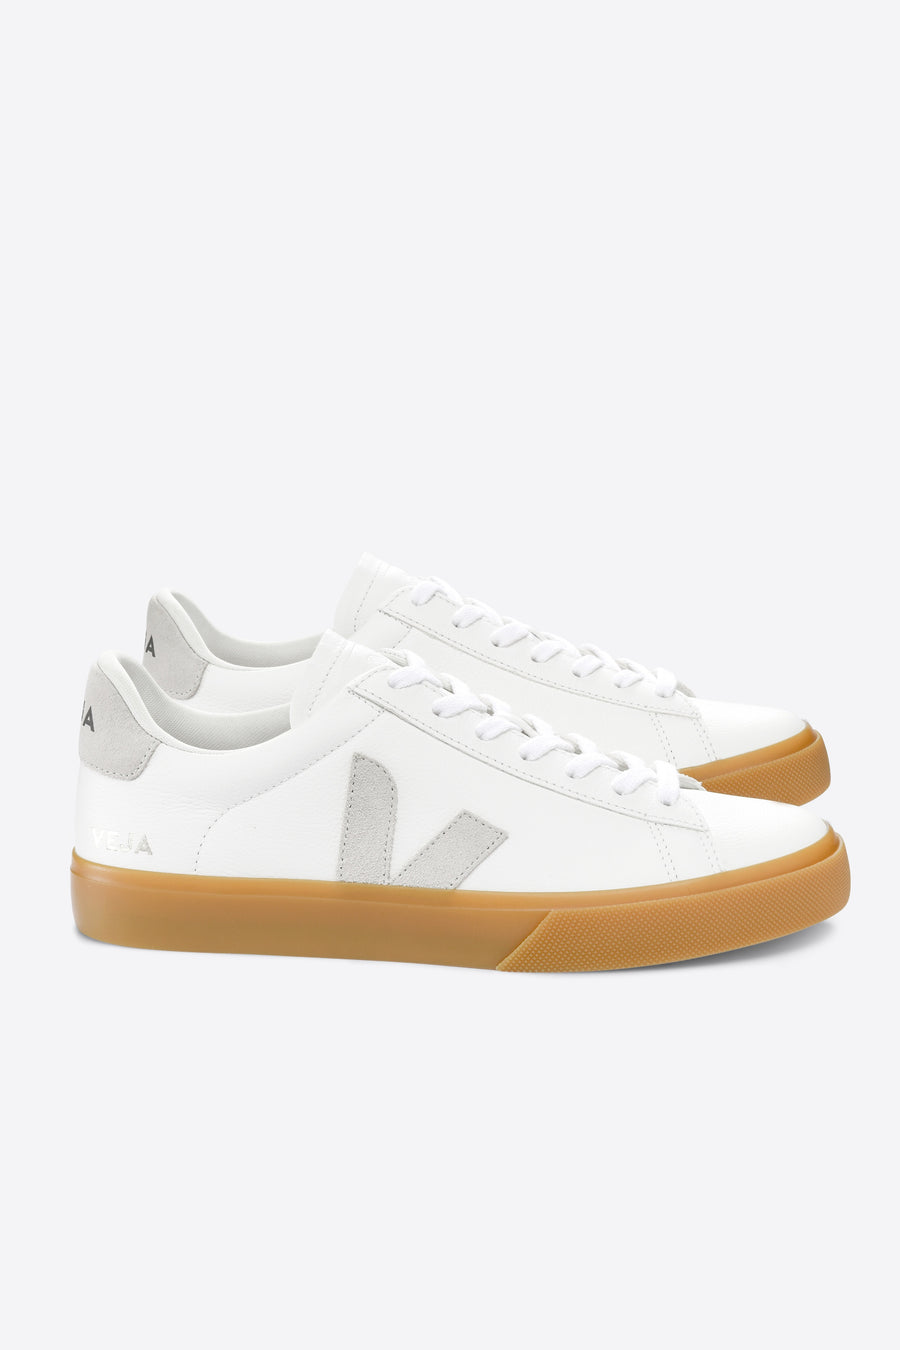 Veja Campo Sneaker - Extra White Natural Natural